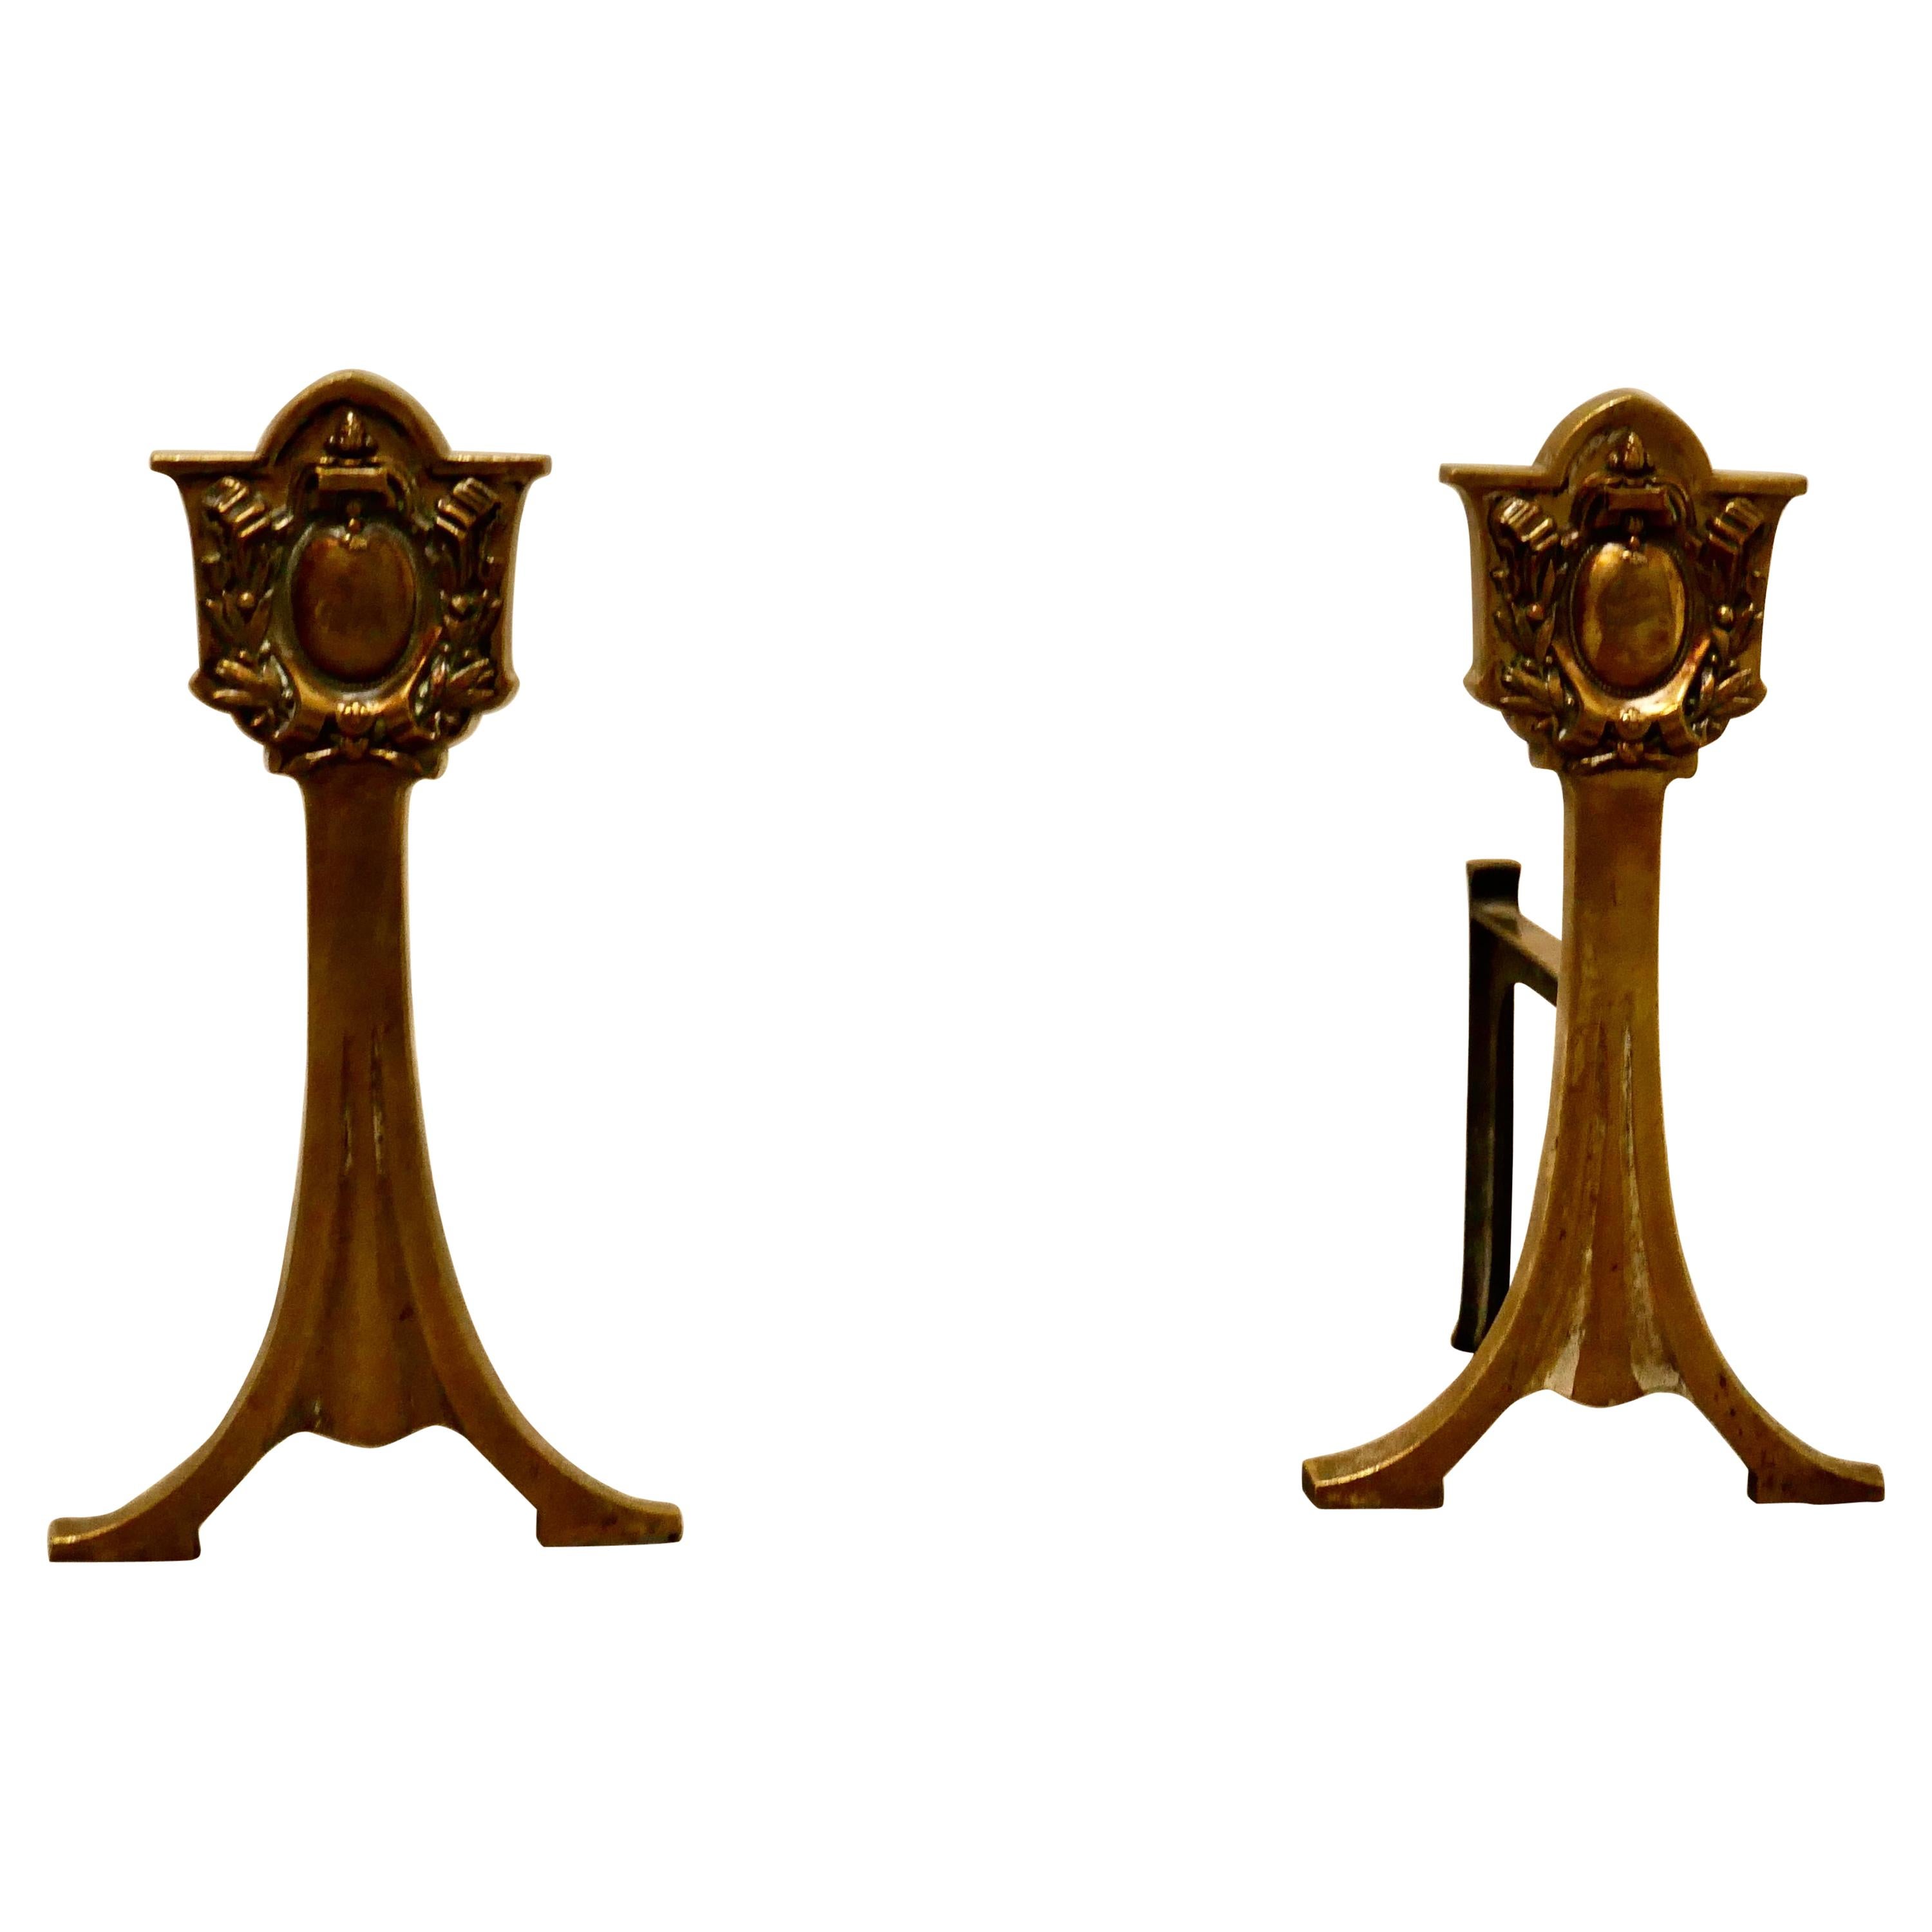 Elegant Pair of 19th Century Brass Andirons or Fire Dogs